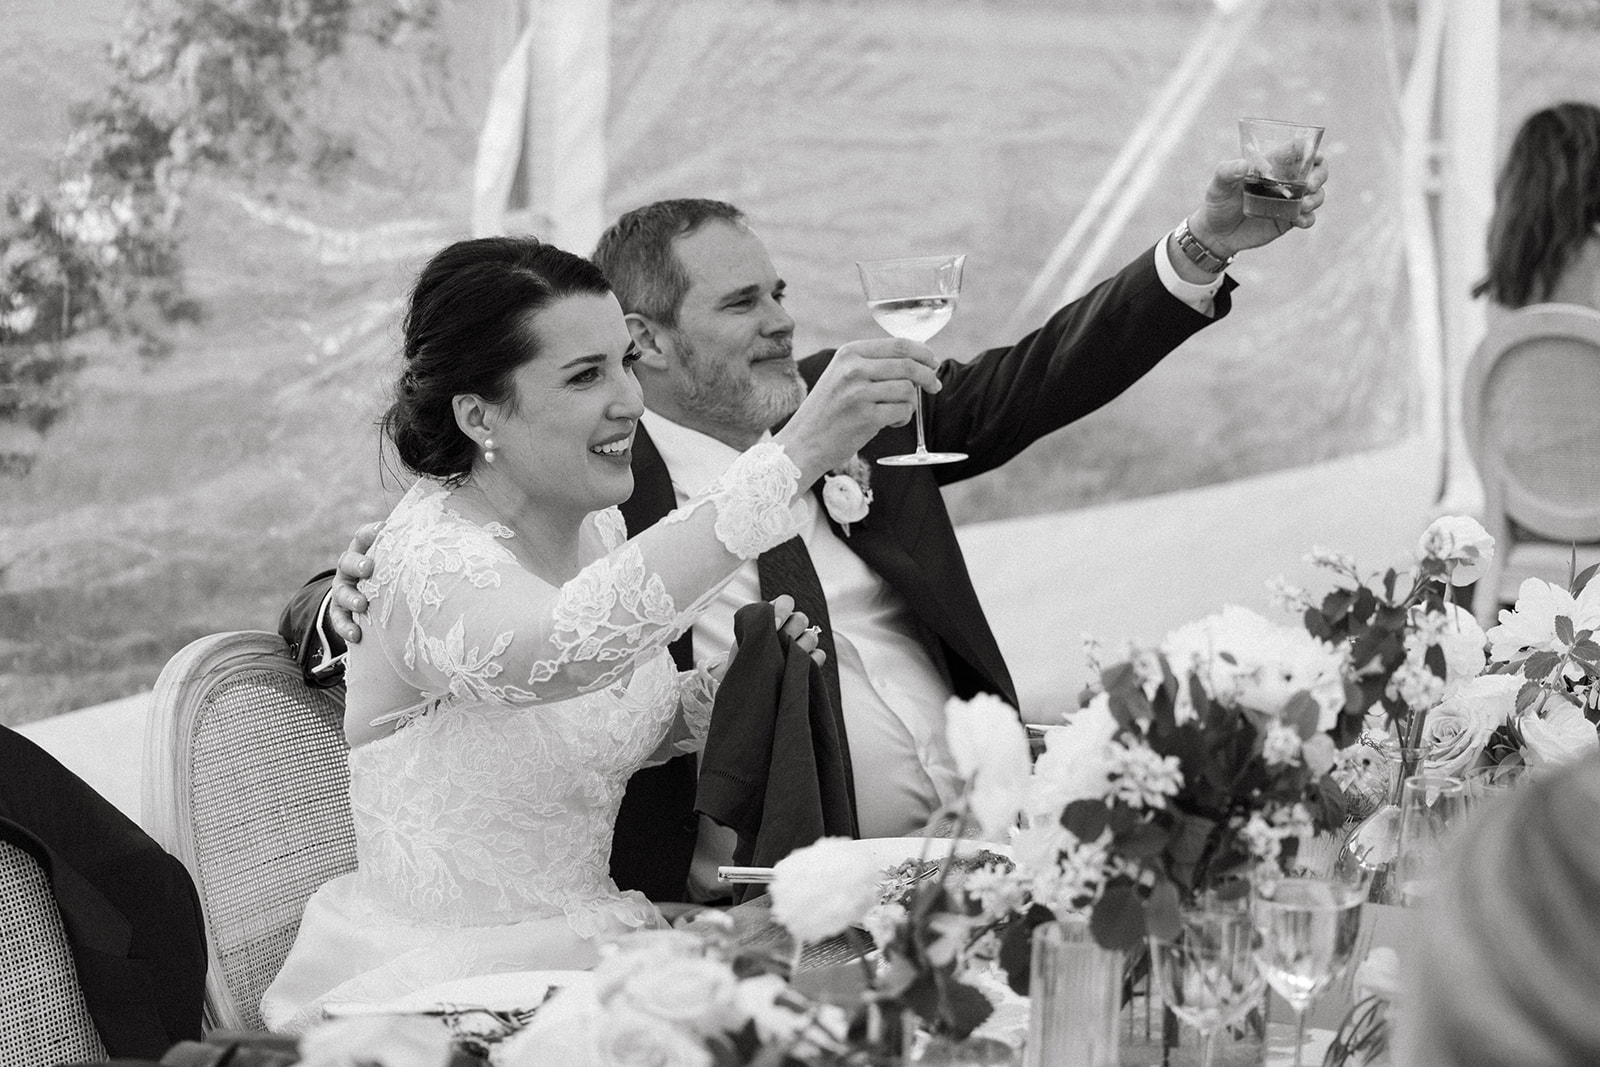 A bride and groom in elegant wedding attire hold up champagne glasses during their wedding reception toast. 